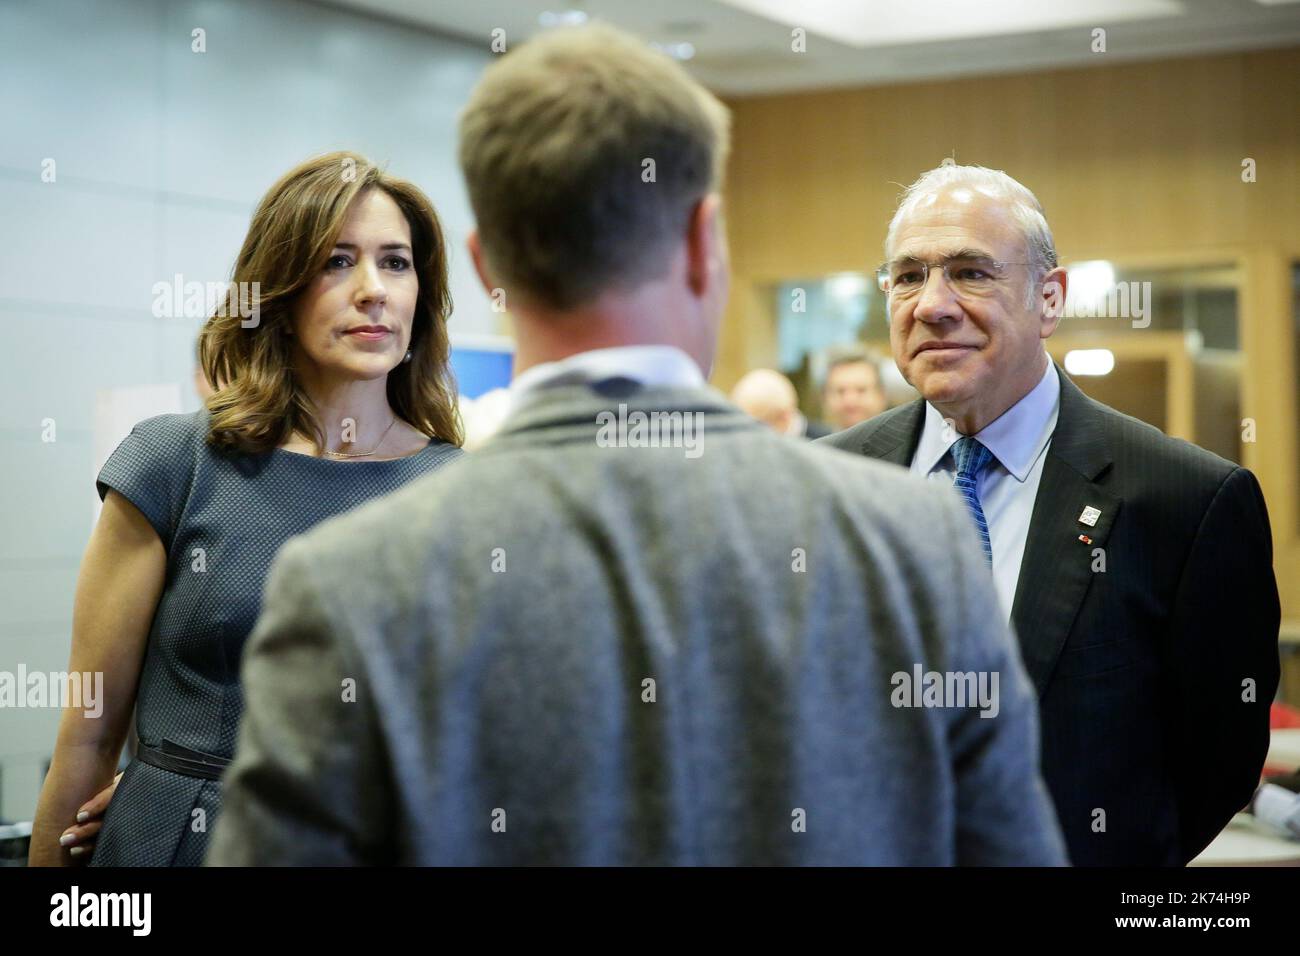 The Danish Crown Princess Mary visites with Secretary General of the Organisation for Economic Co-operation and Development (OECD), Jose Angel Gurria the virtual reality lounge during the Forum 2017 at the OECD (Organisation for Economic Co-operation and Development) headquarters in Paris, France Stock Photo